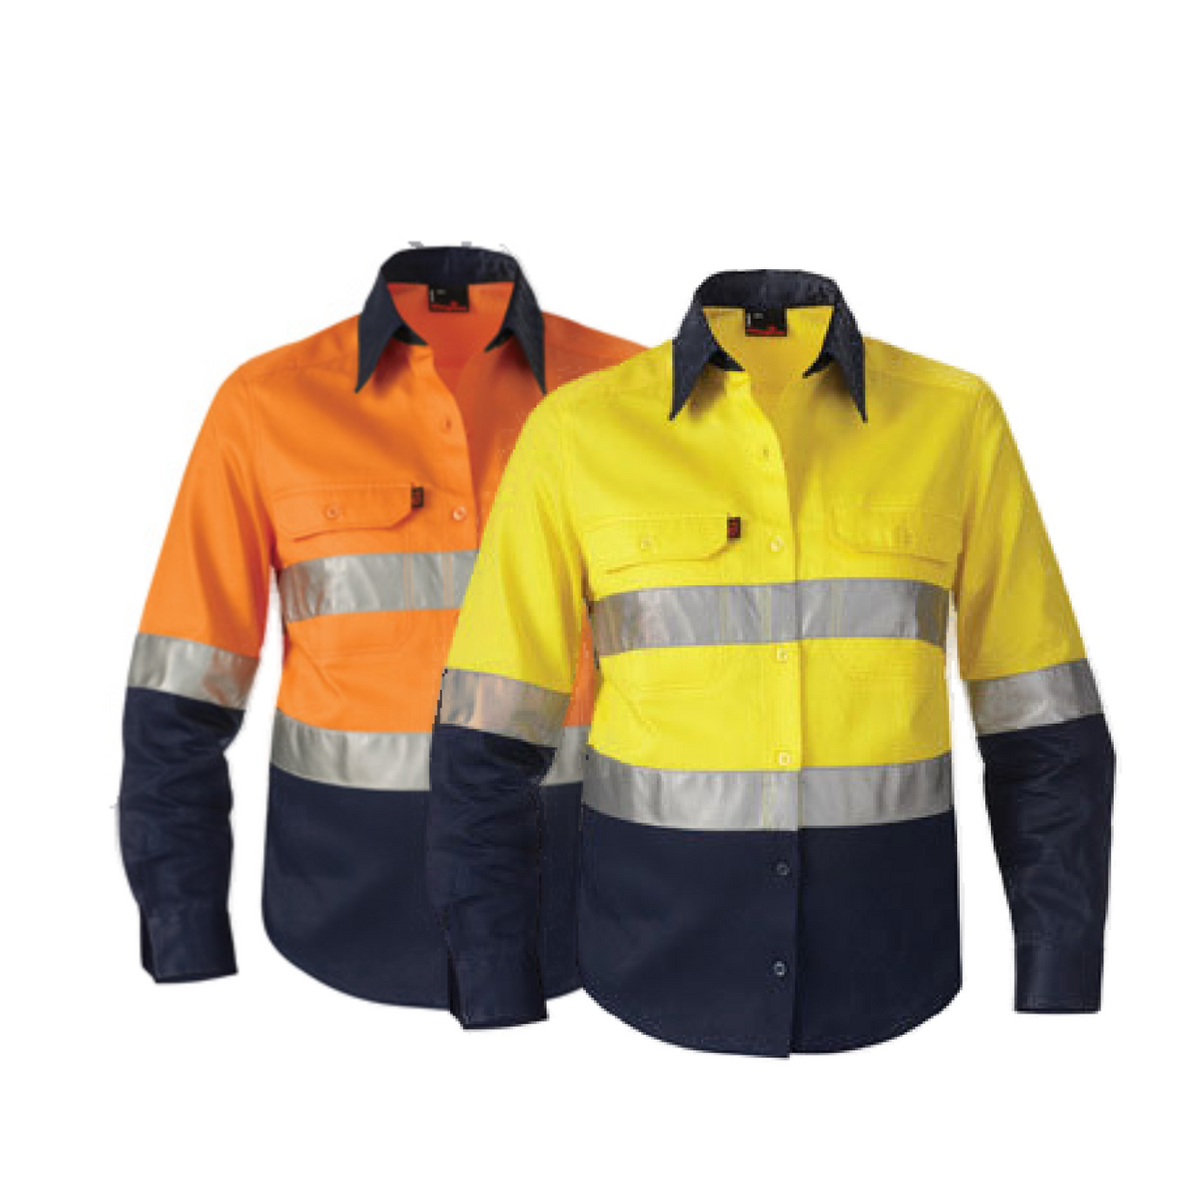 KingGee Womens Hi-Vis Cotton Drill Shirt L/S Reflective Tape Work Safety K44532-Collins Clothing Co